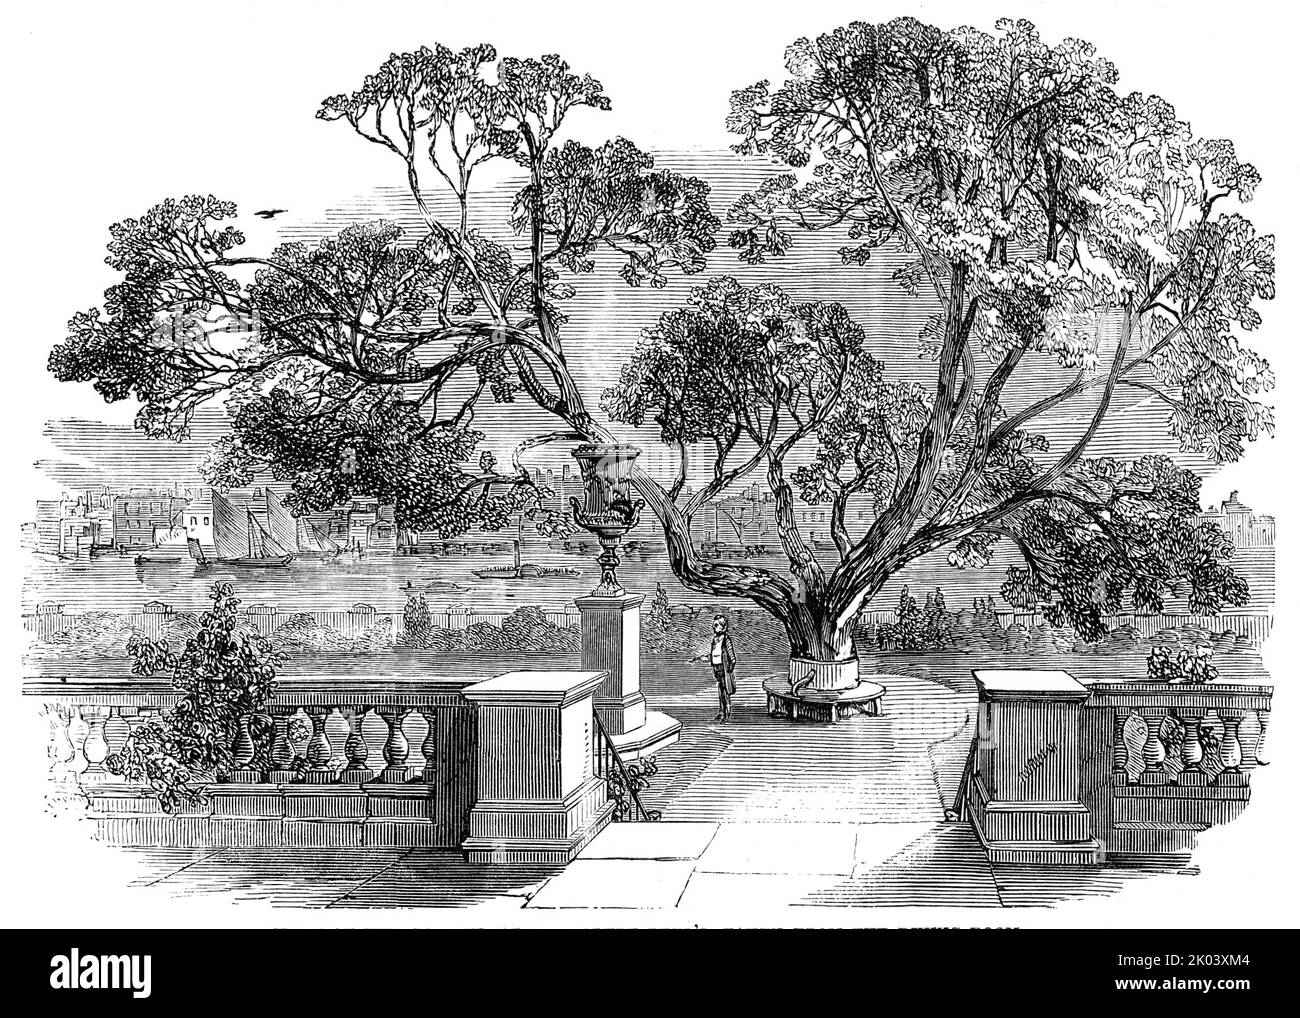 View of the Garden, at Sir Robert Peel's, taken from the Dining-Room, 1850. View of '...the Lawn, in the rear of the mansion, the garden of which extends to the Thames'. British prime minister Robert Peel owned a house at No. 4 Whitehall Gardens in London. From &quot;Illustrated London News&quot;, 1850. Stock Photo